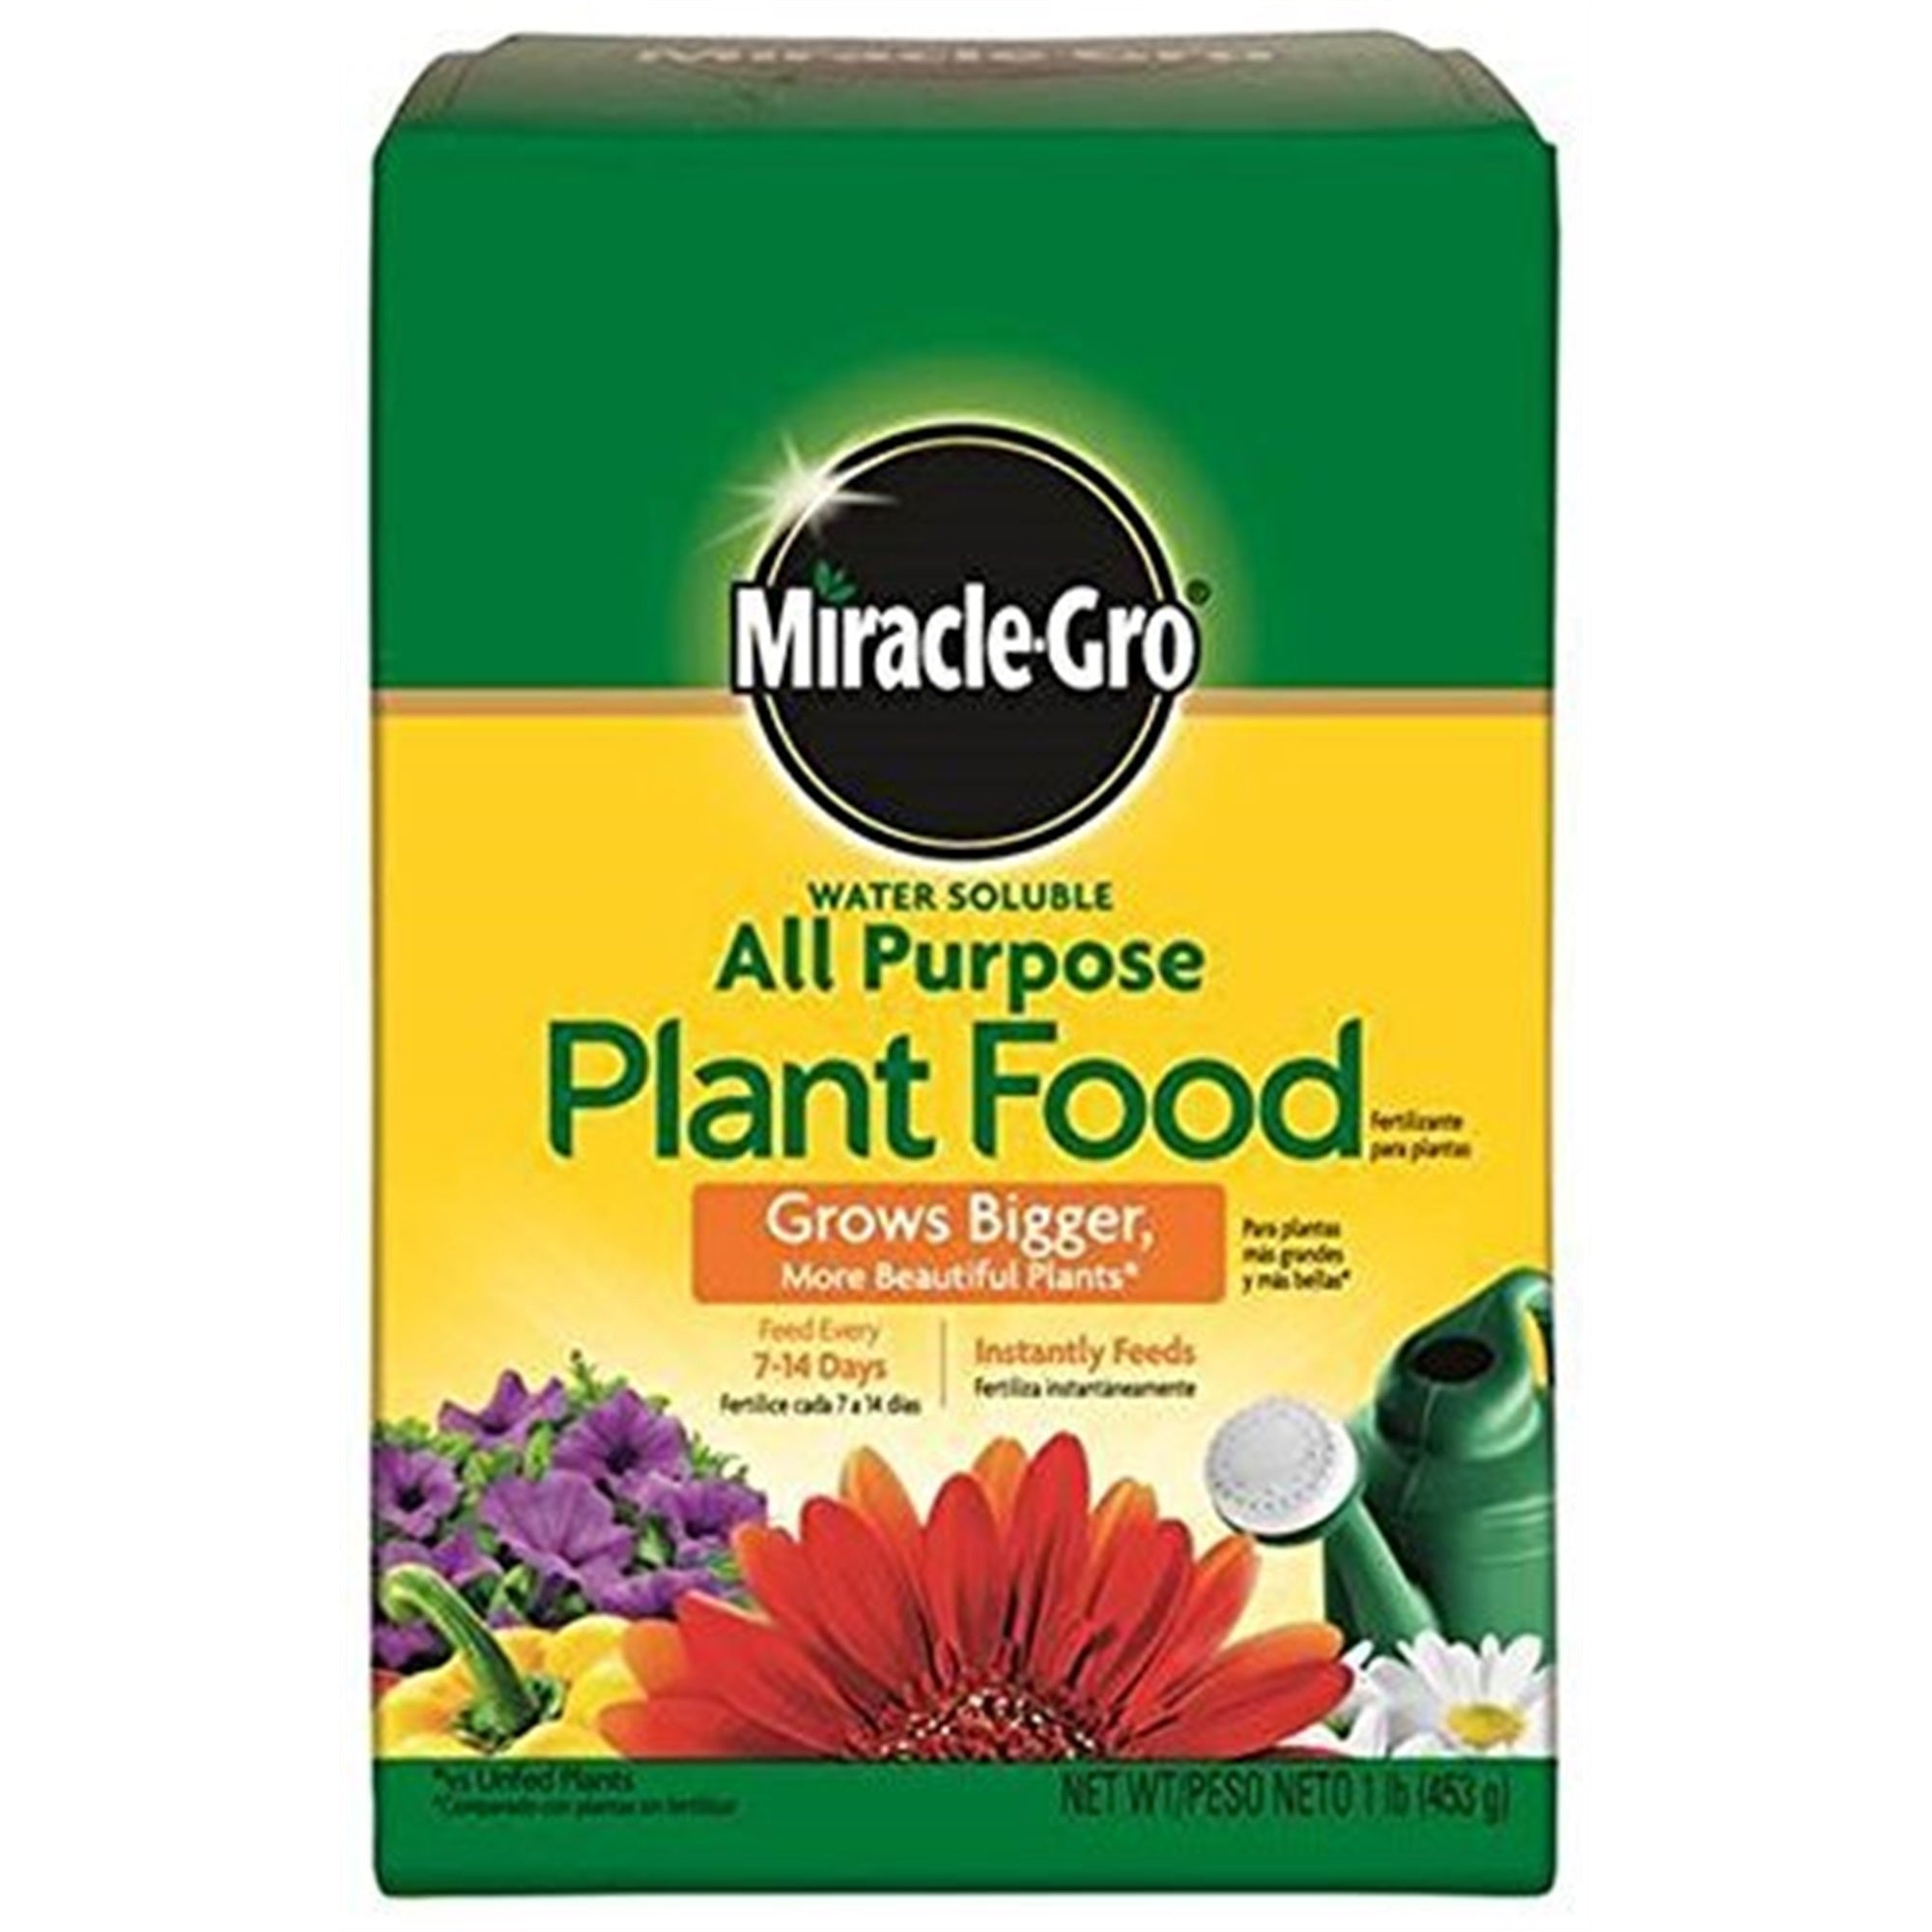 Miracle-Gro Water Soluble All Purpose Plant Food, 1lb